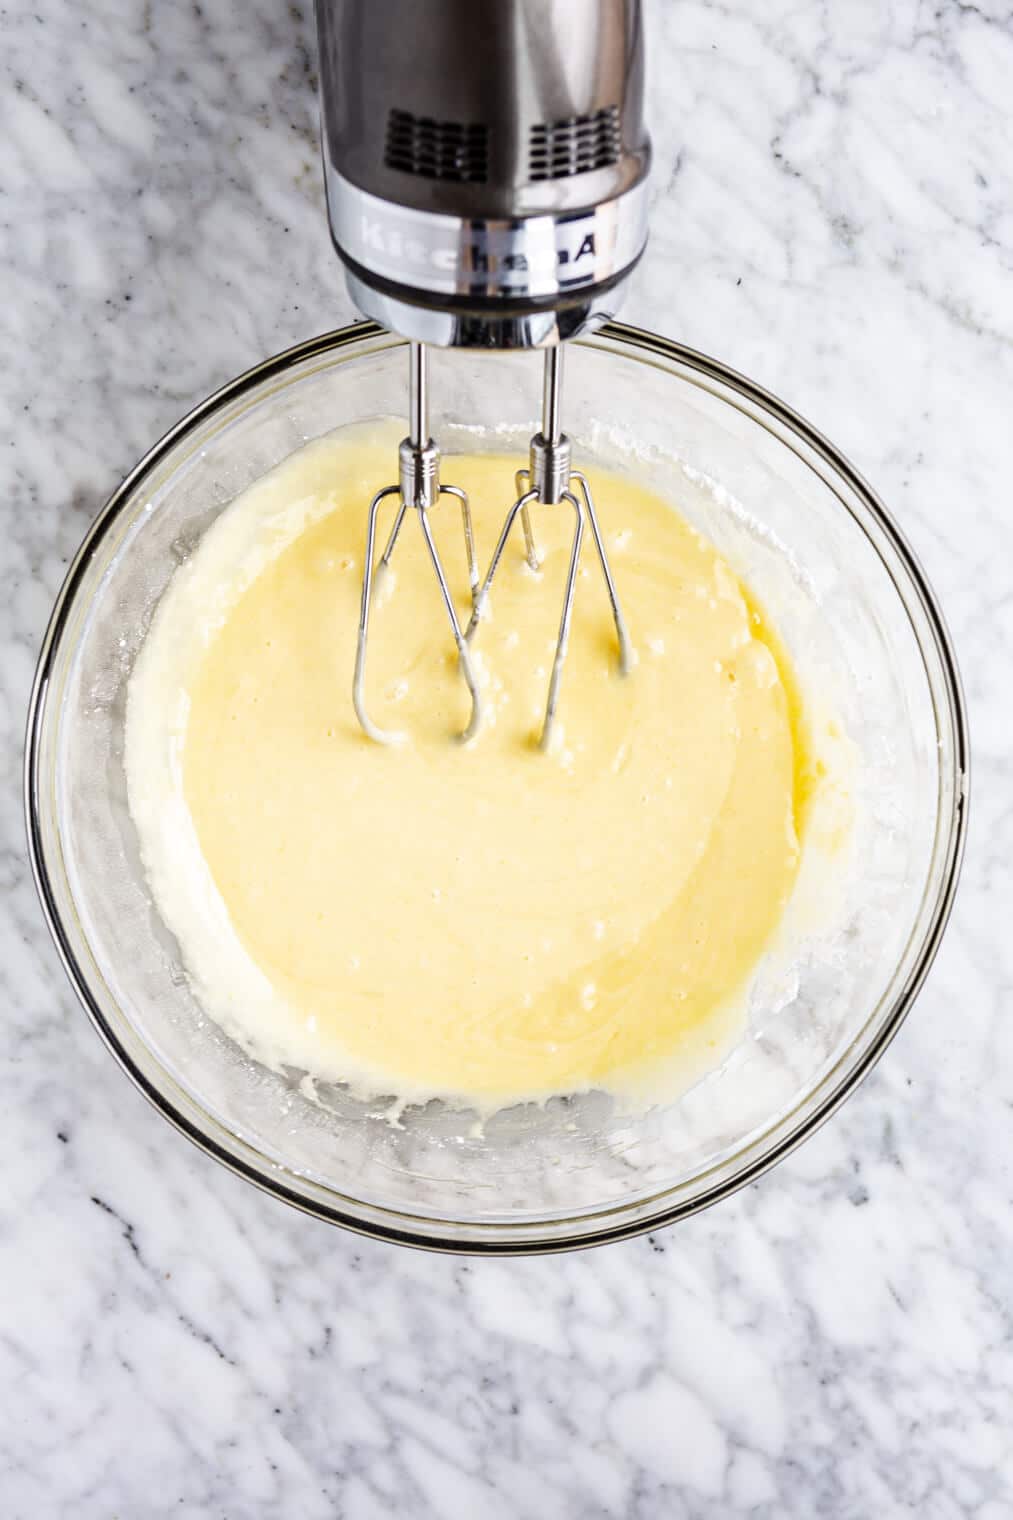 Batter in a glass bowl with hand mixer resting on the side of the bowl.